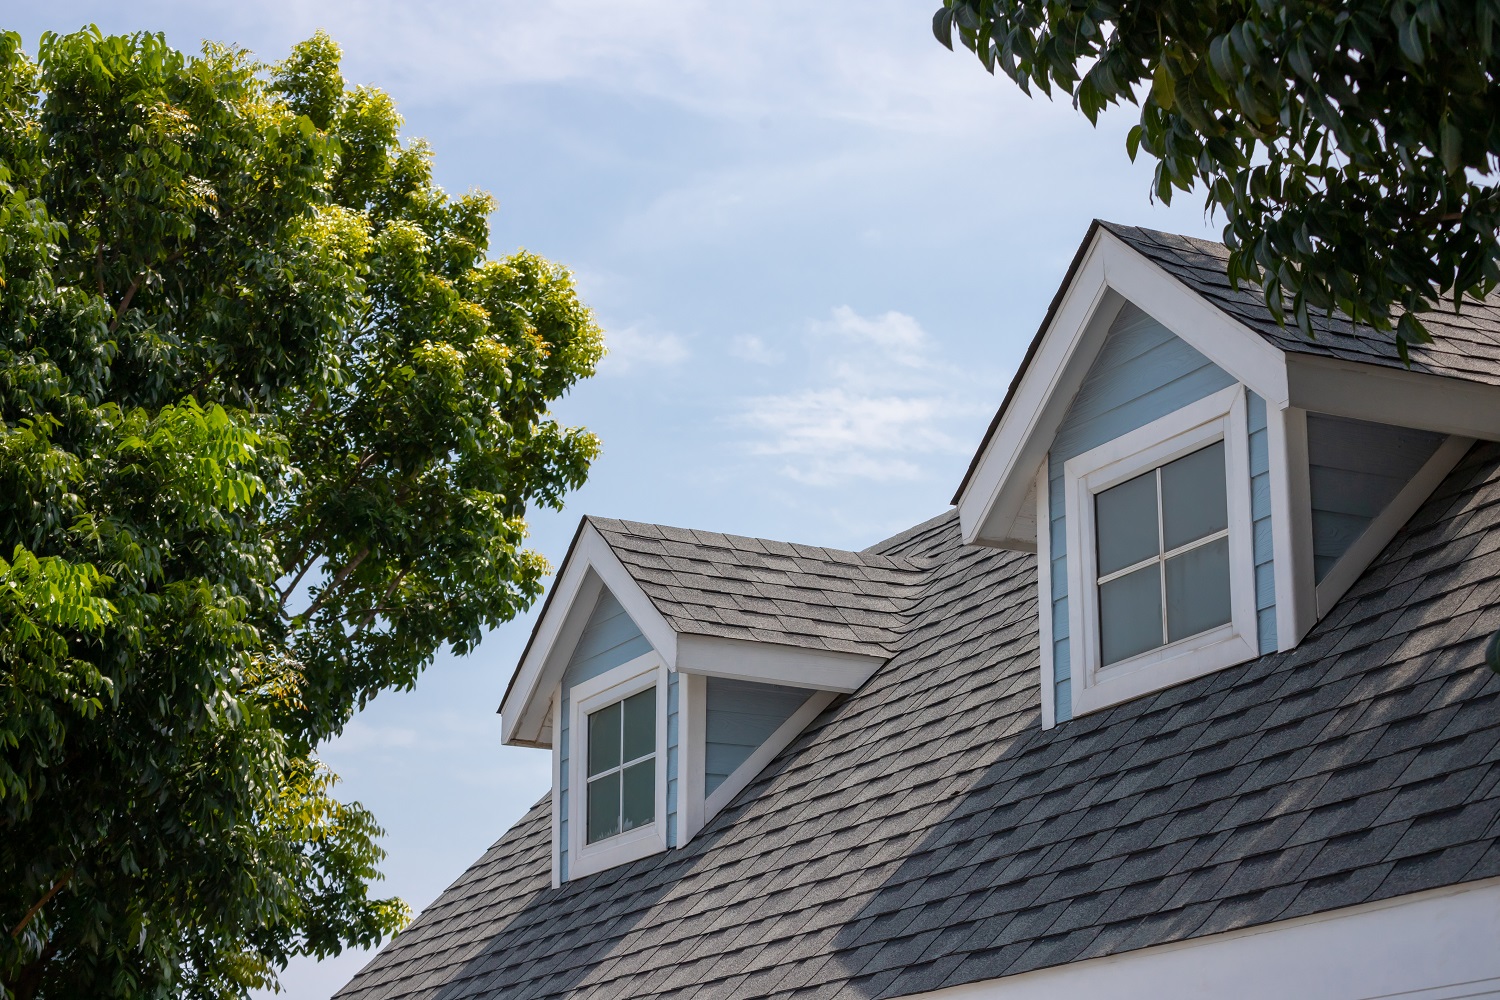 Premier Shingle Roof Replacement Service in San Diego